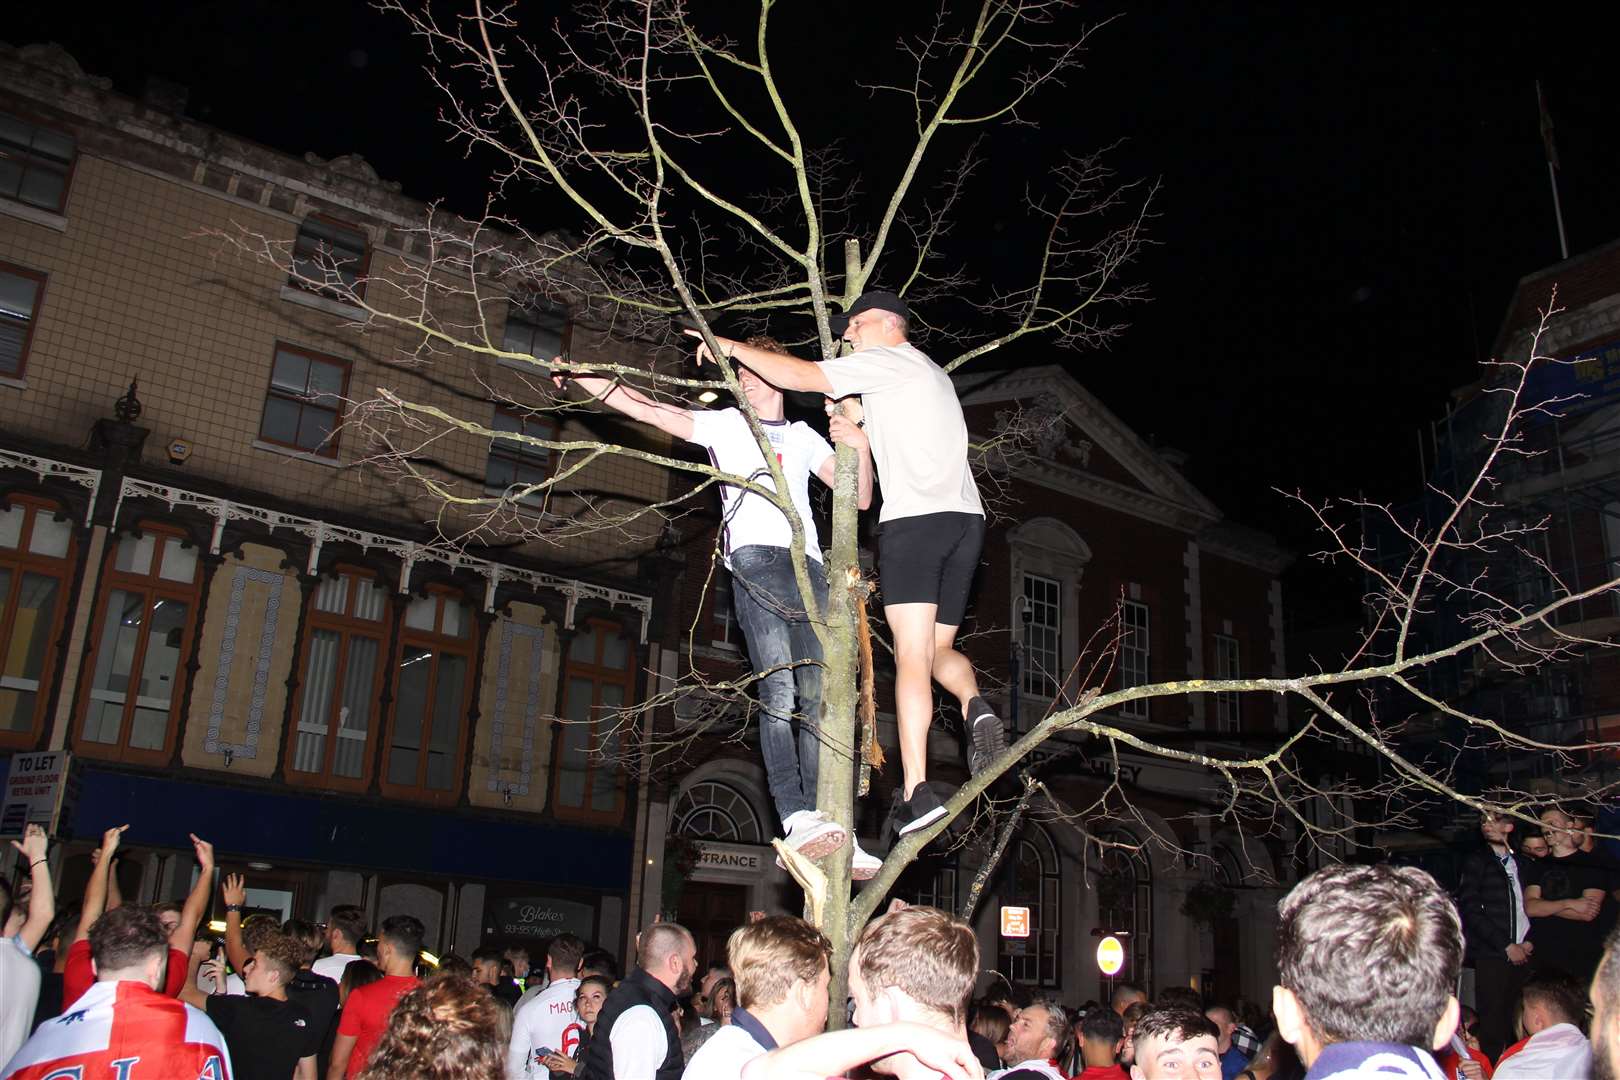 Some braver fans climbed an unsteady looking tree in Maidstone town centre. Heidi Harrison-Steele